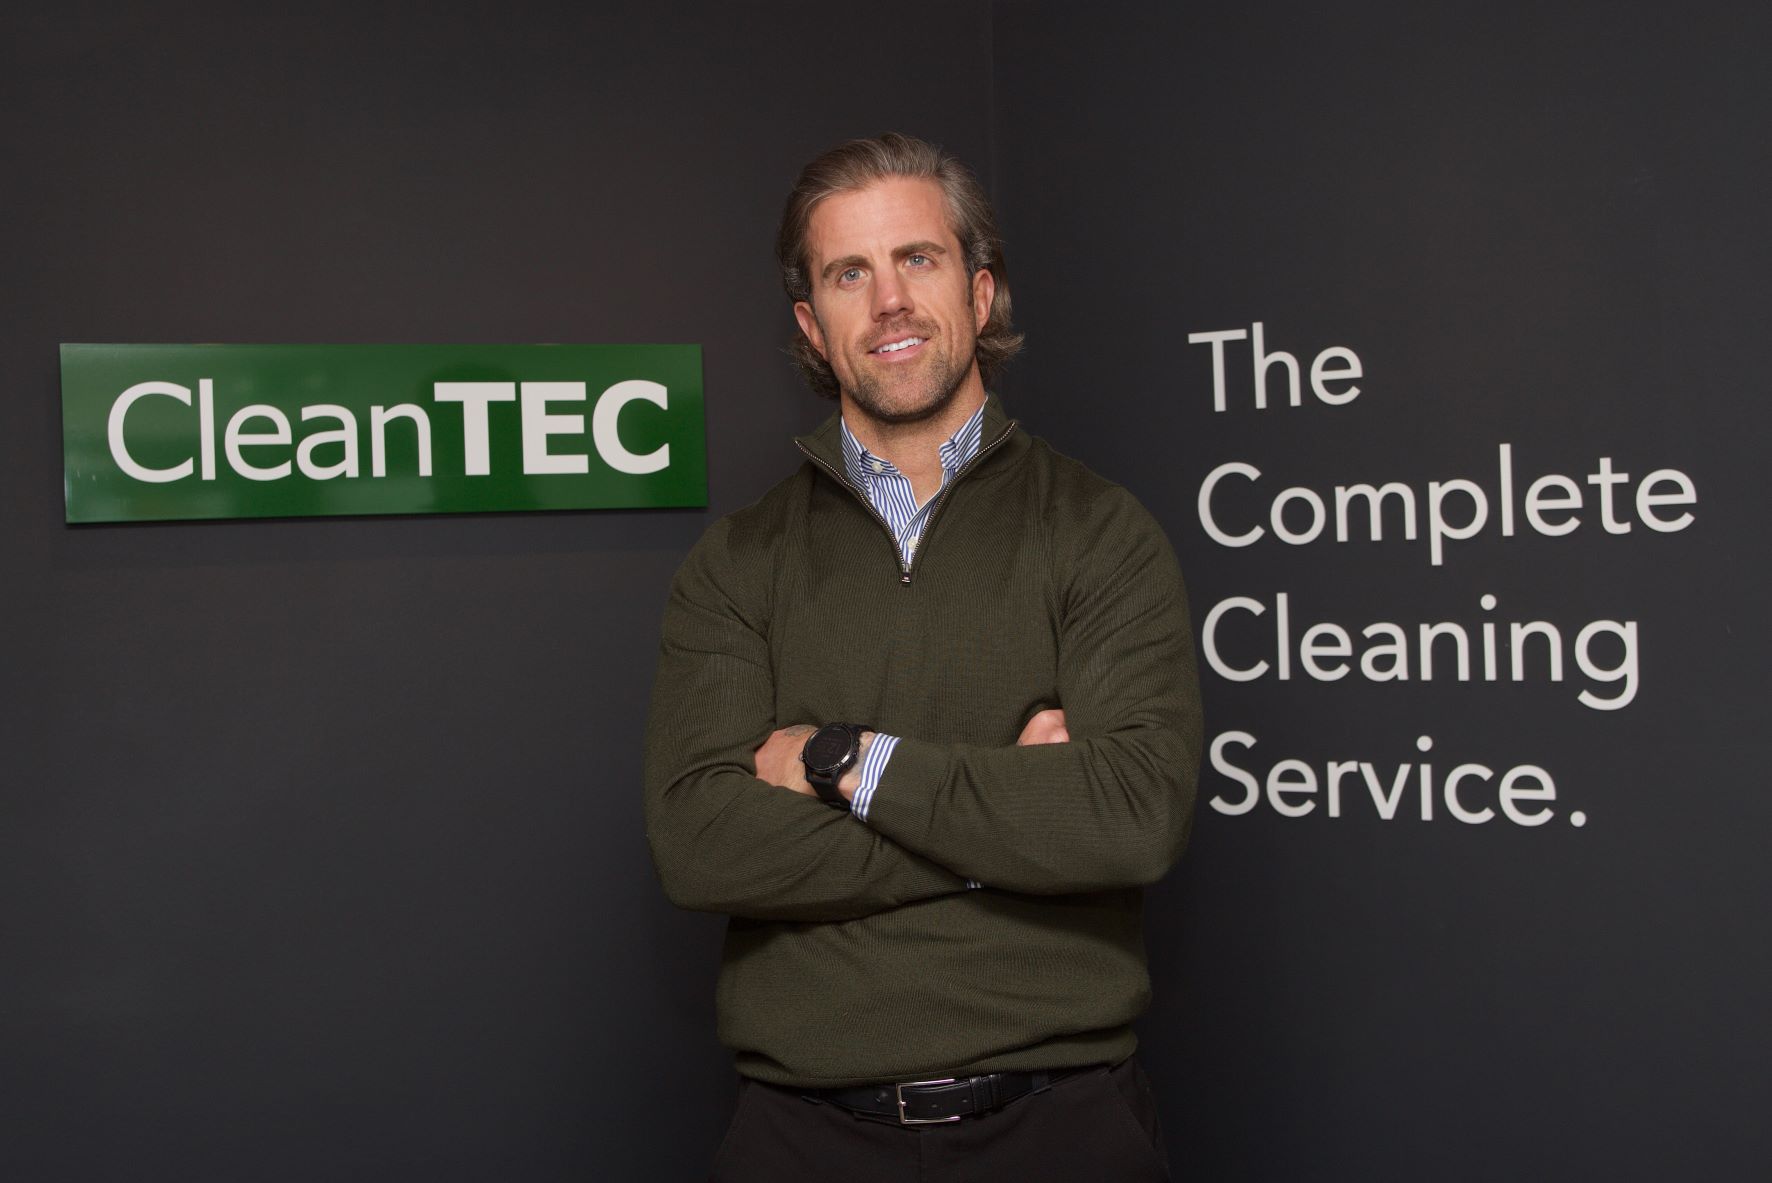 Scotland's first window cleaning franchise launches after £50,000 investment